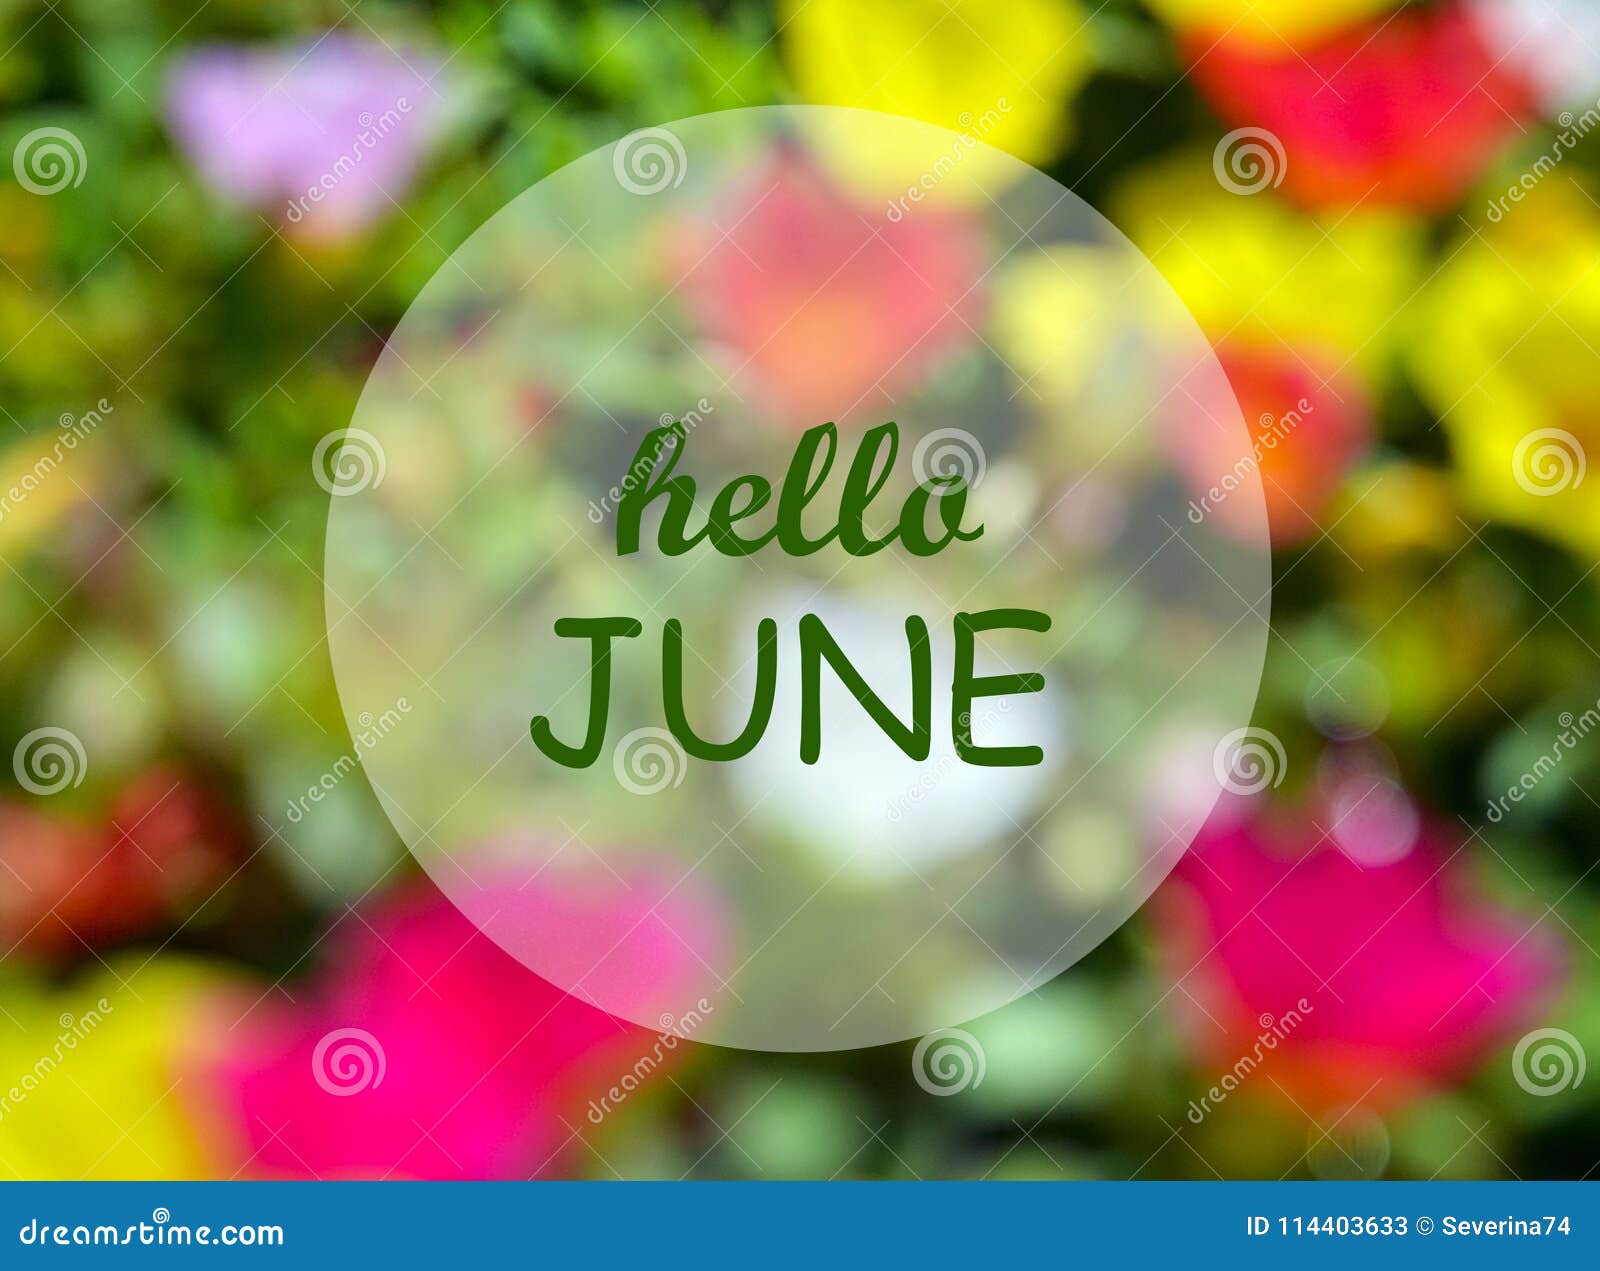 hello june.welcoming card with text on natural blurred floral background.summertime concept.